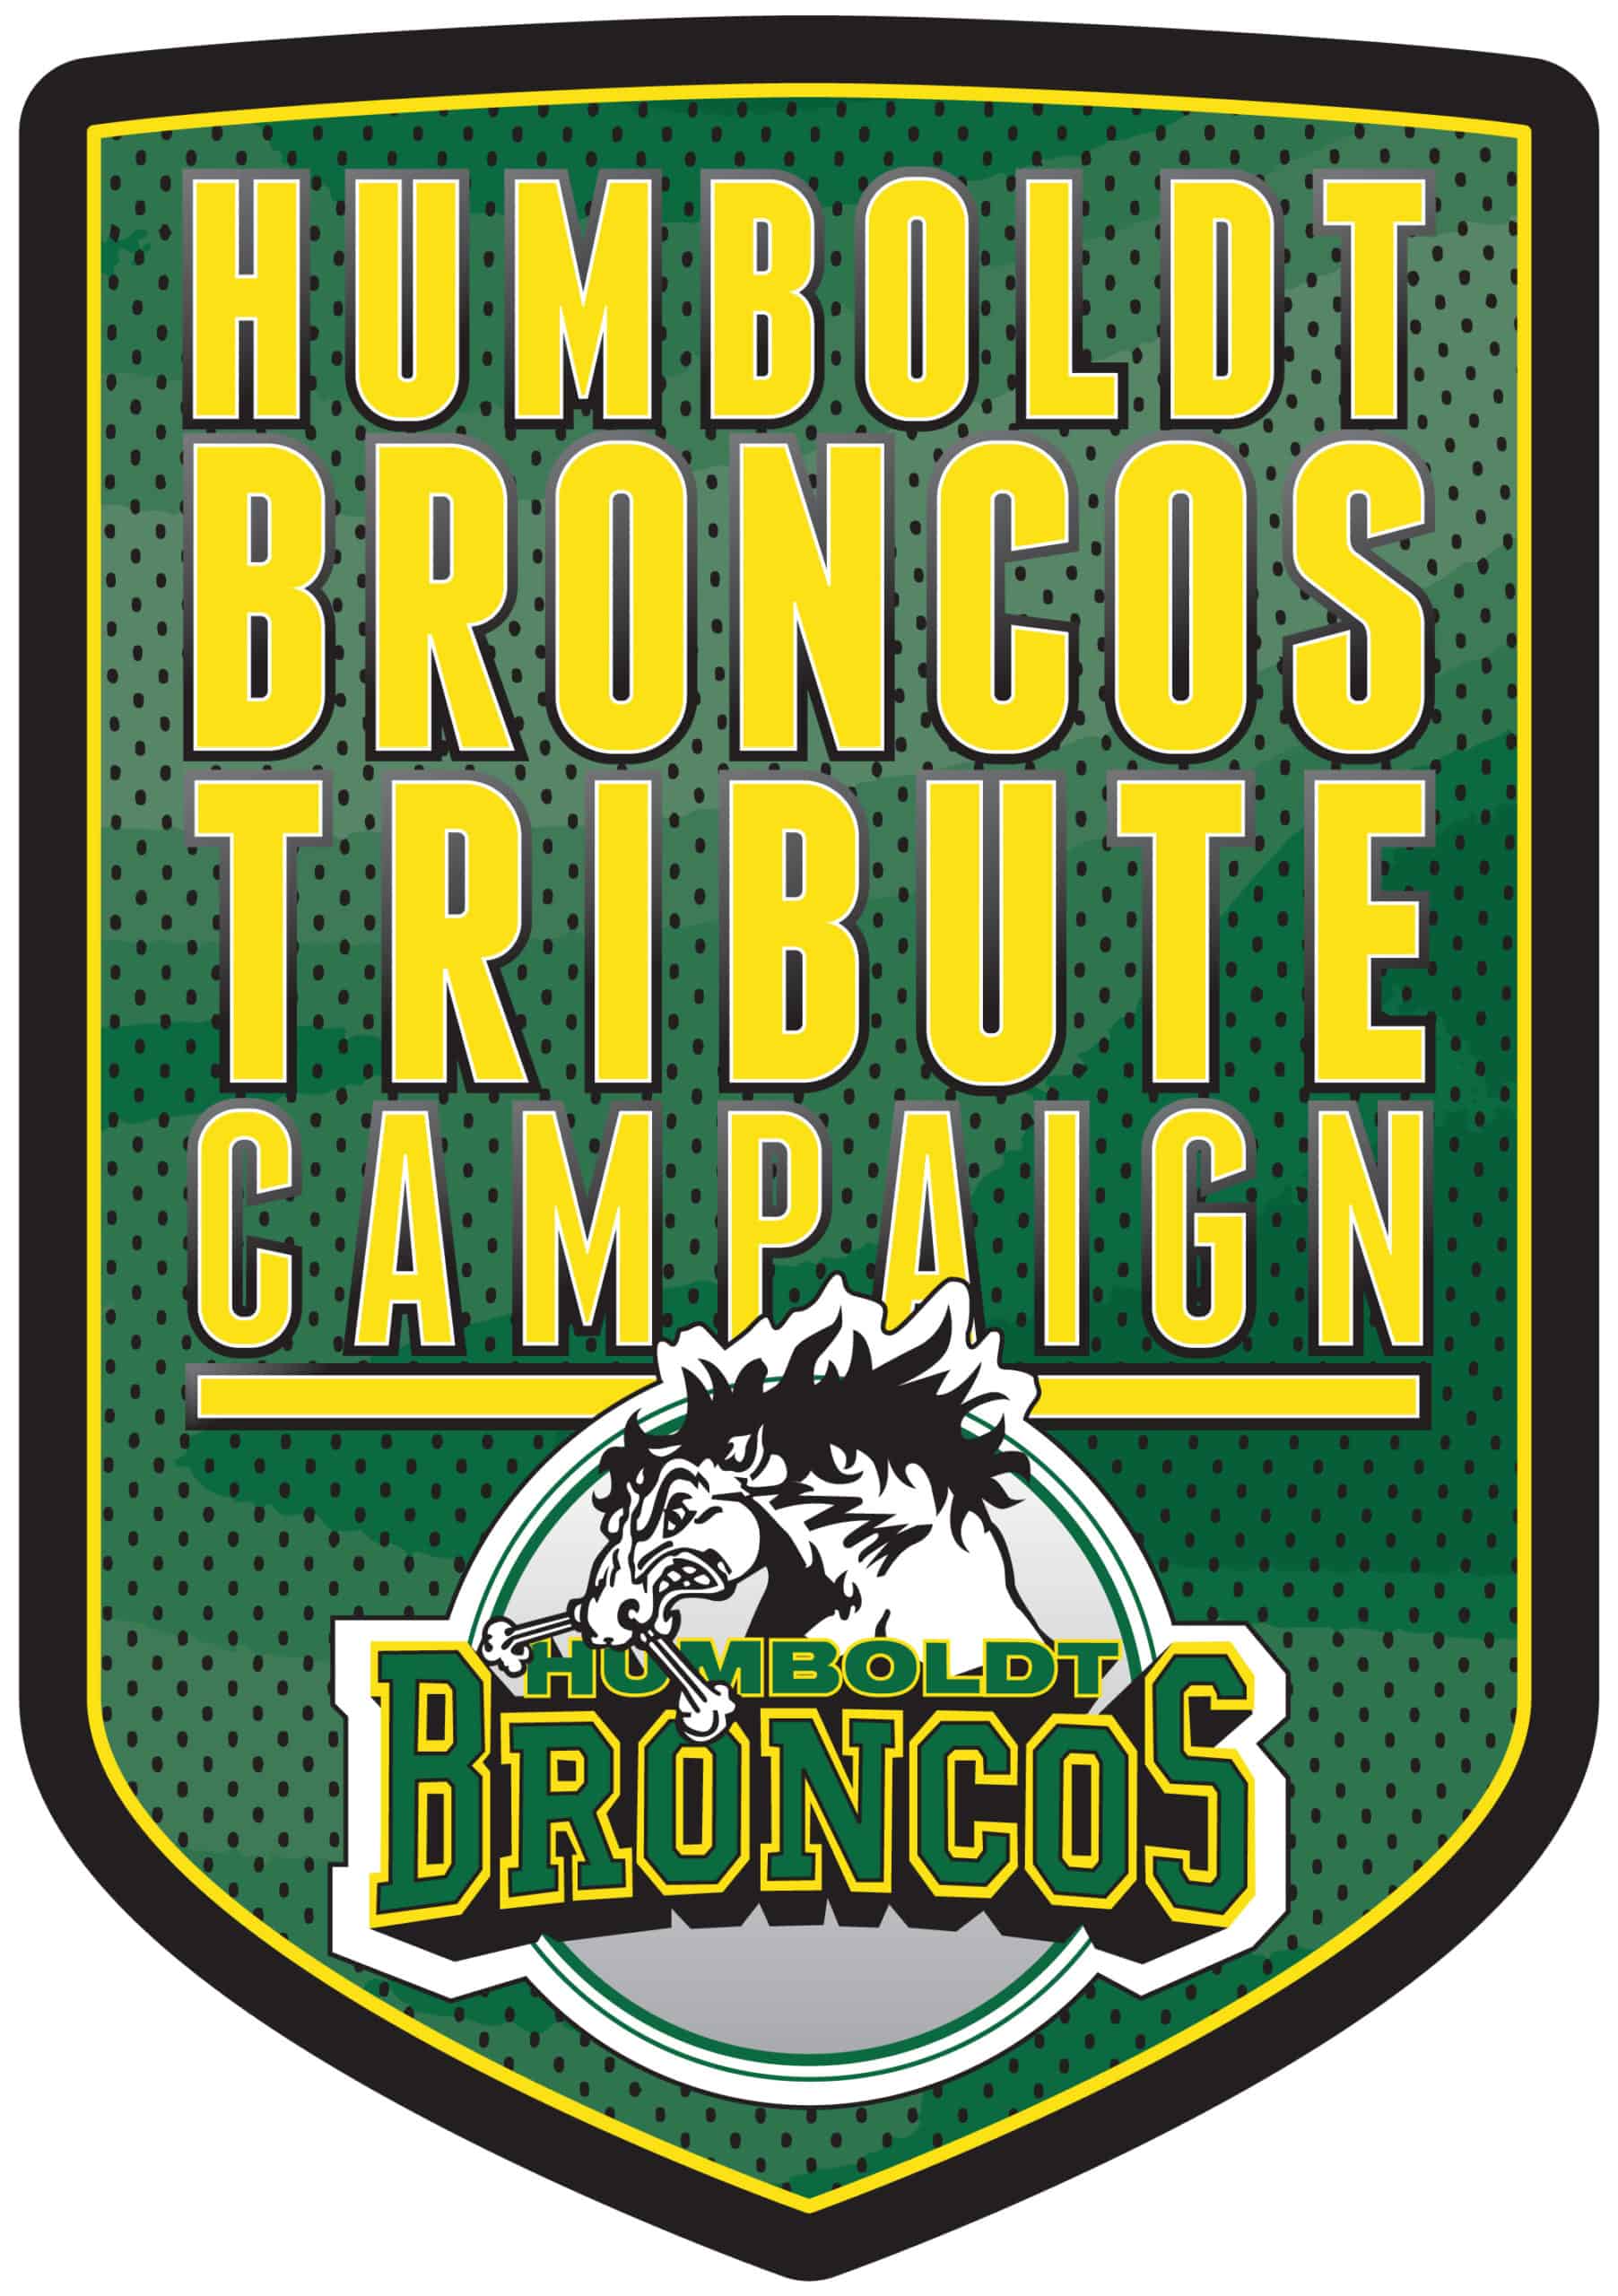 Proposed Broncos Tribute Centre and Roadside Memorial Announced